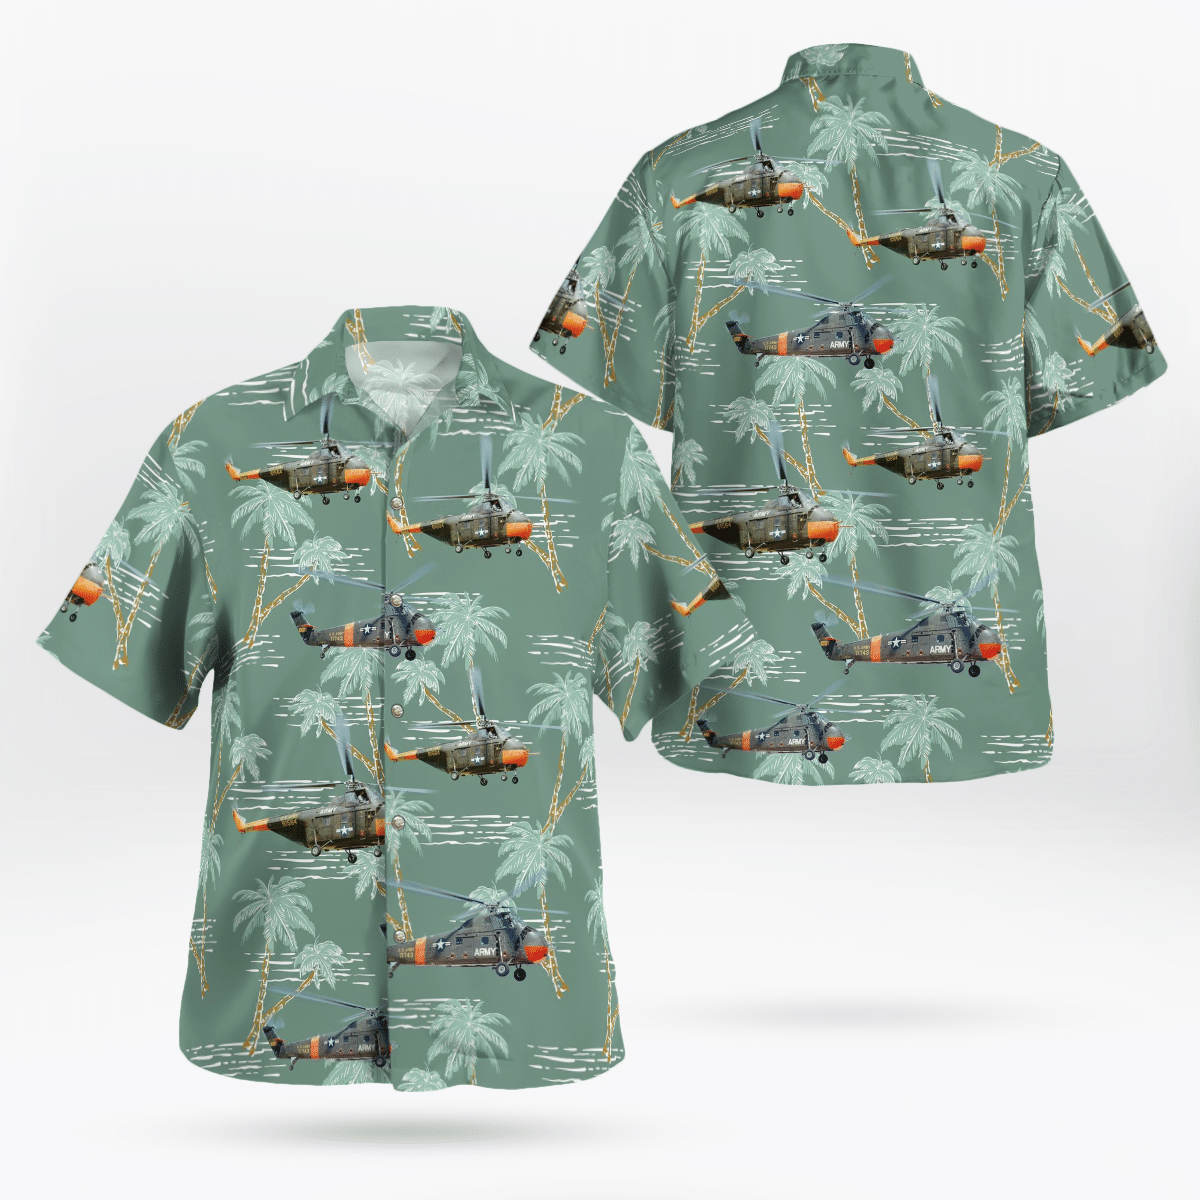 Shop now to find the perfect Hawaii Shirt for your hobby 65